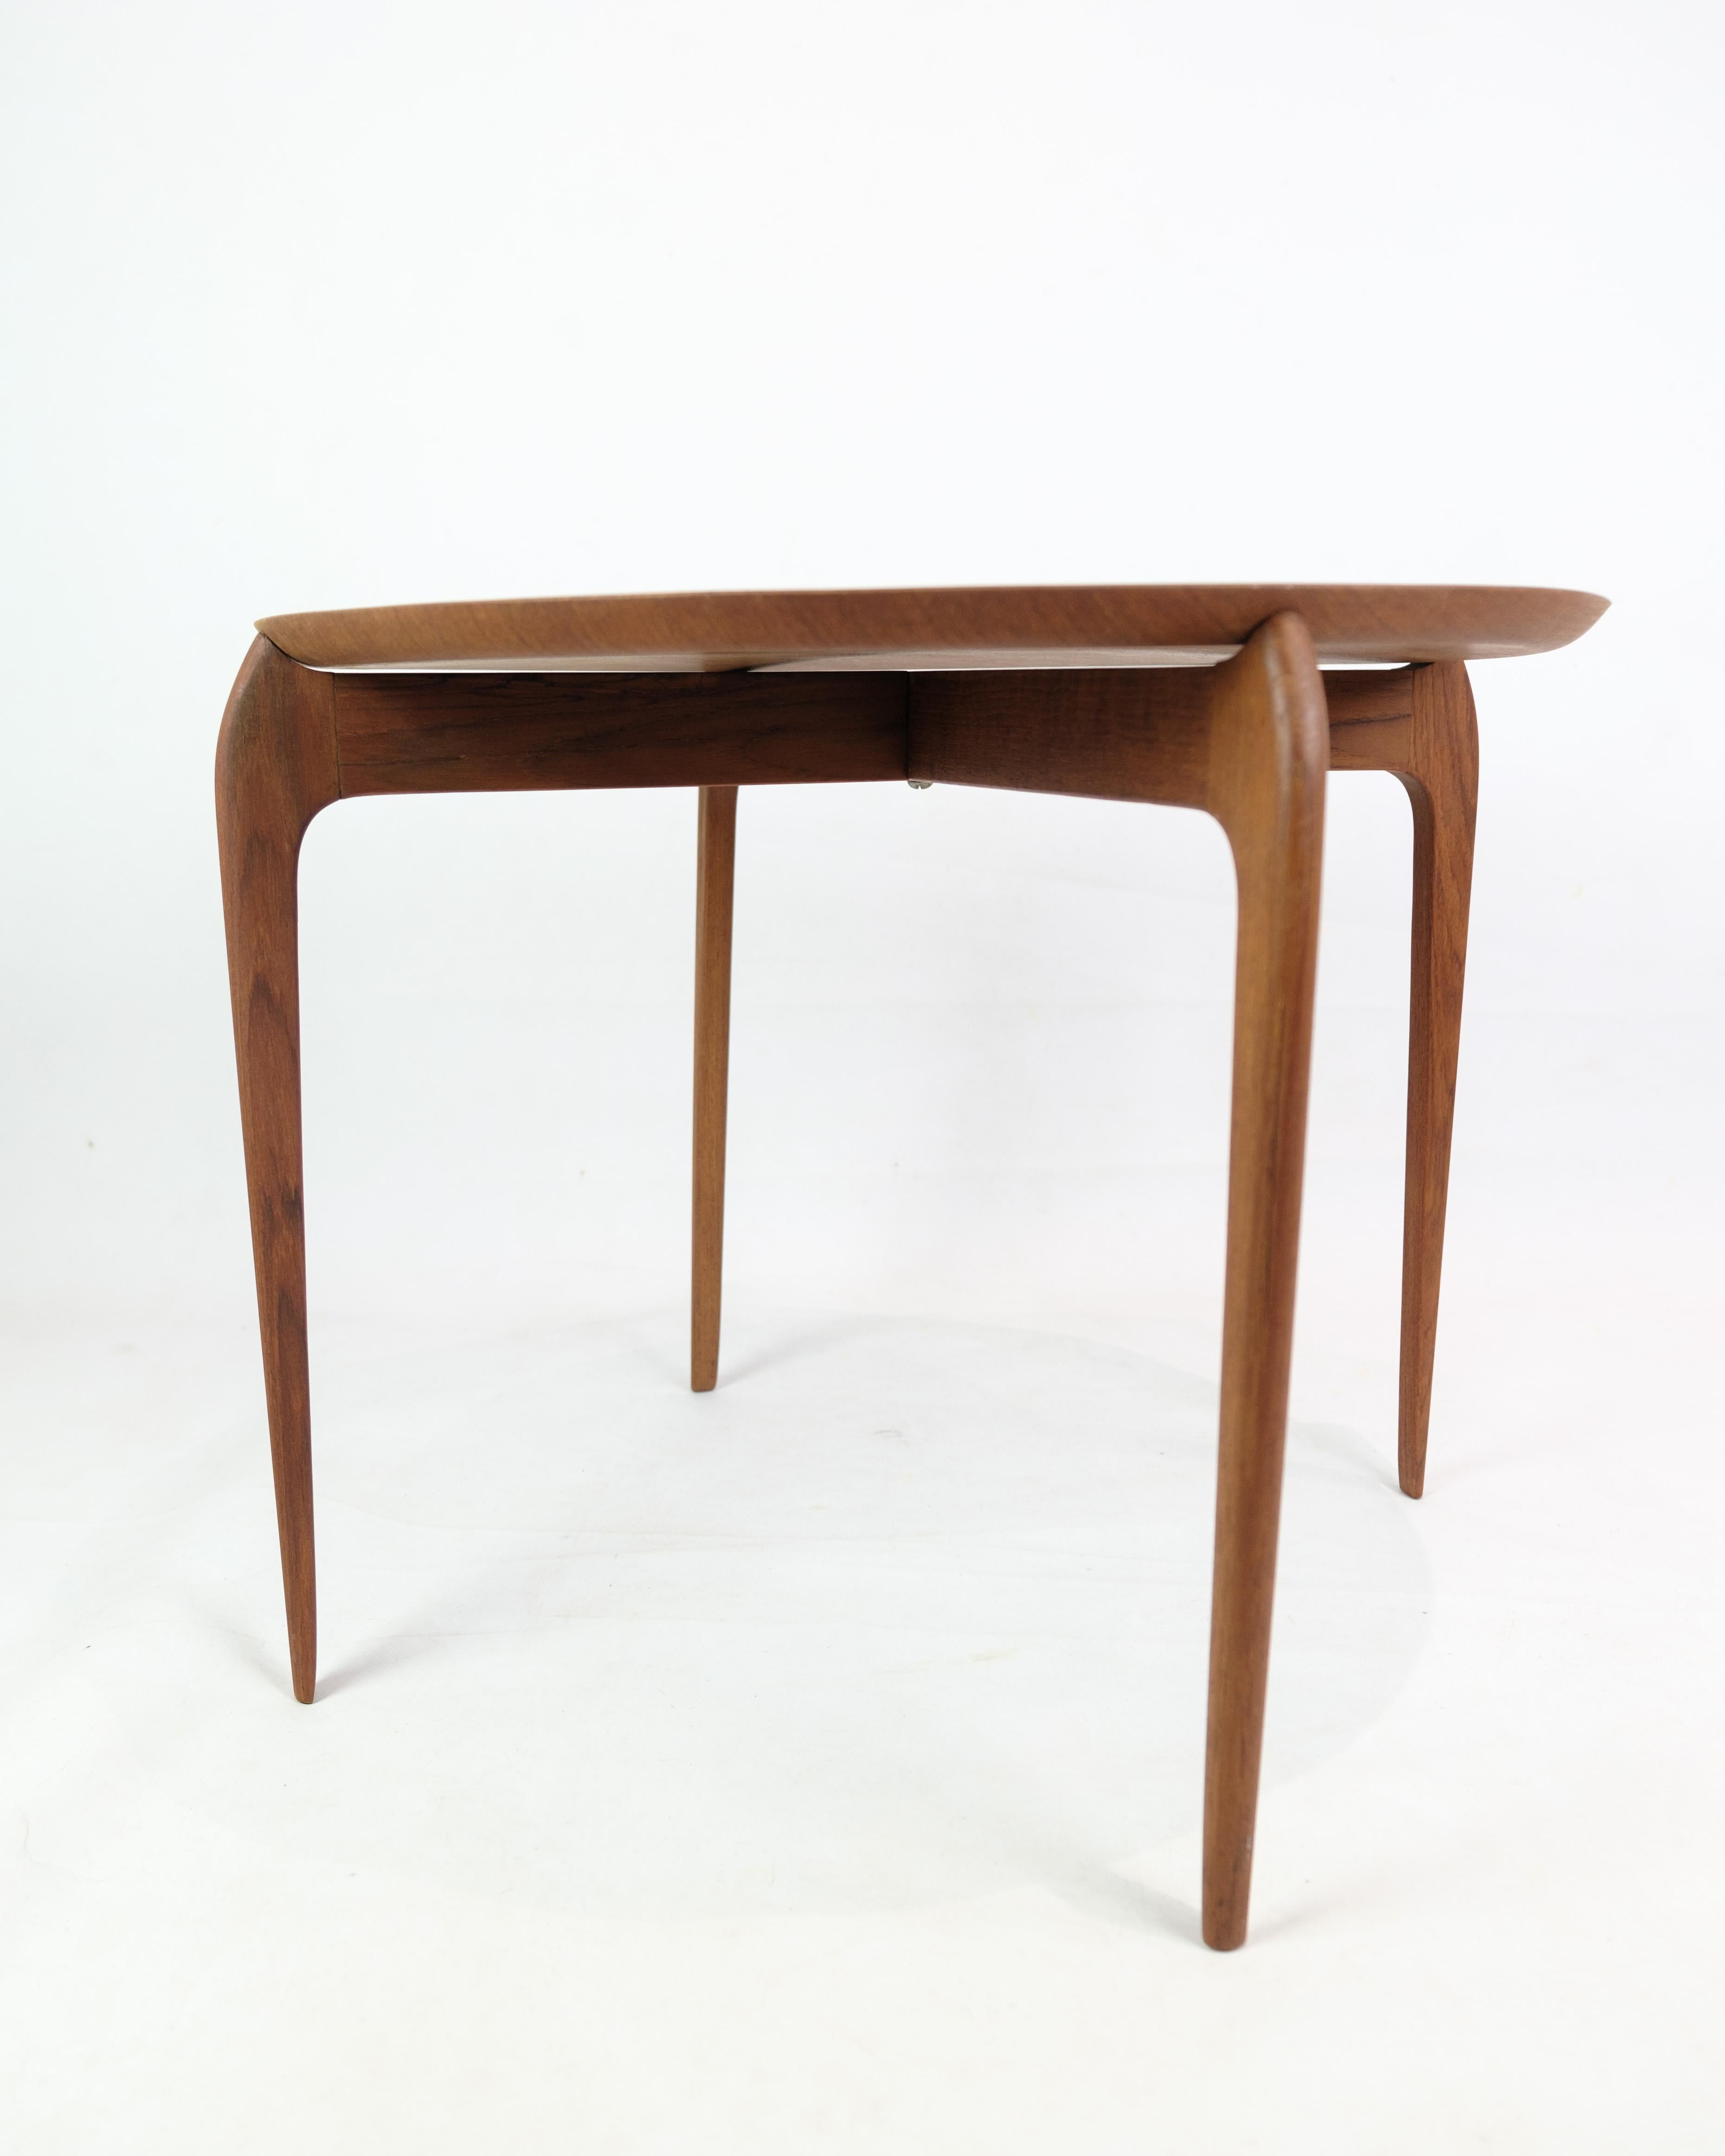 Side table designed by Svend Willumsen & H. Engholm and made in teak wood by Fritz Hansen around the 1950s. This side table represents a combination of excellent design and craftsmanship from an era known for its focus on functionality and